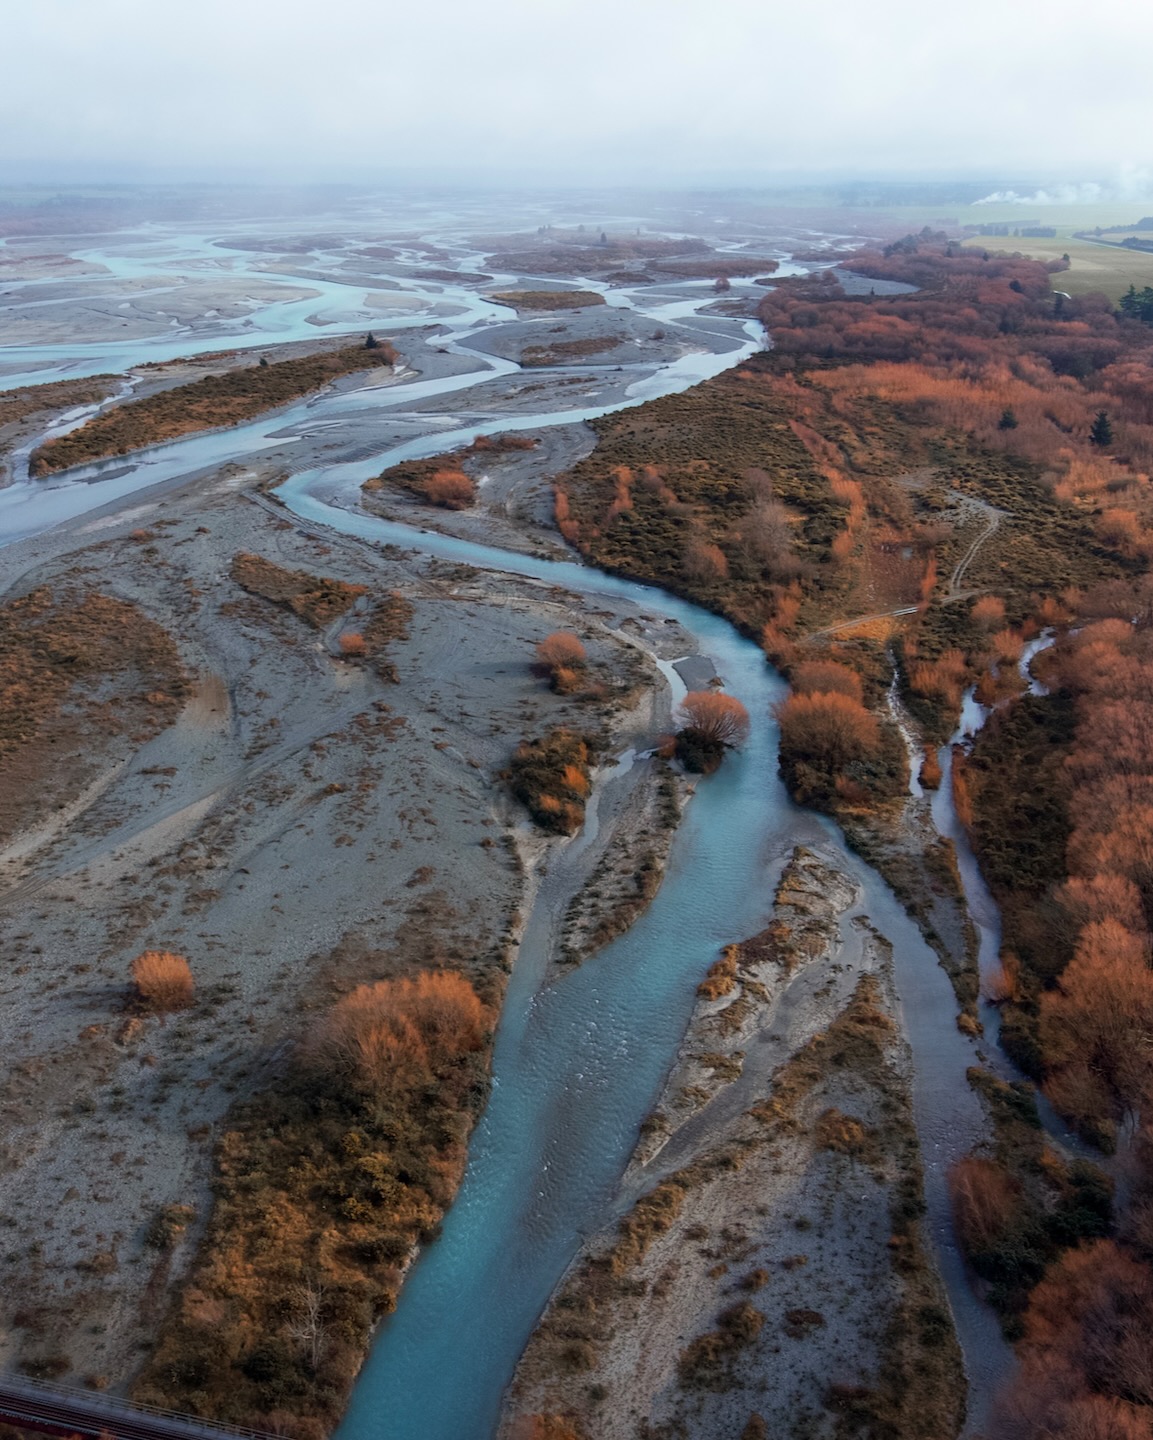 The Rakaia river stretches off into the distance in a low-quality Mini 2 photo